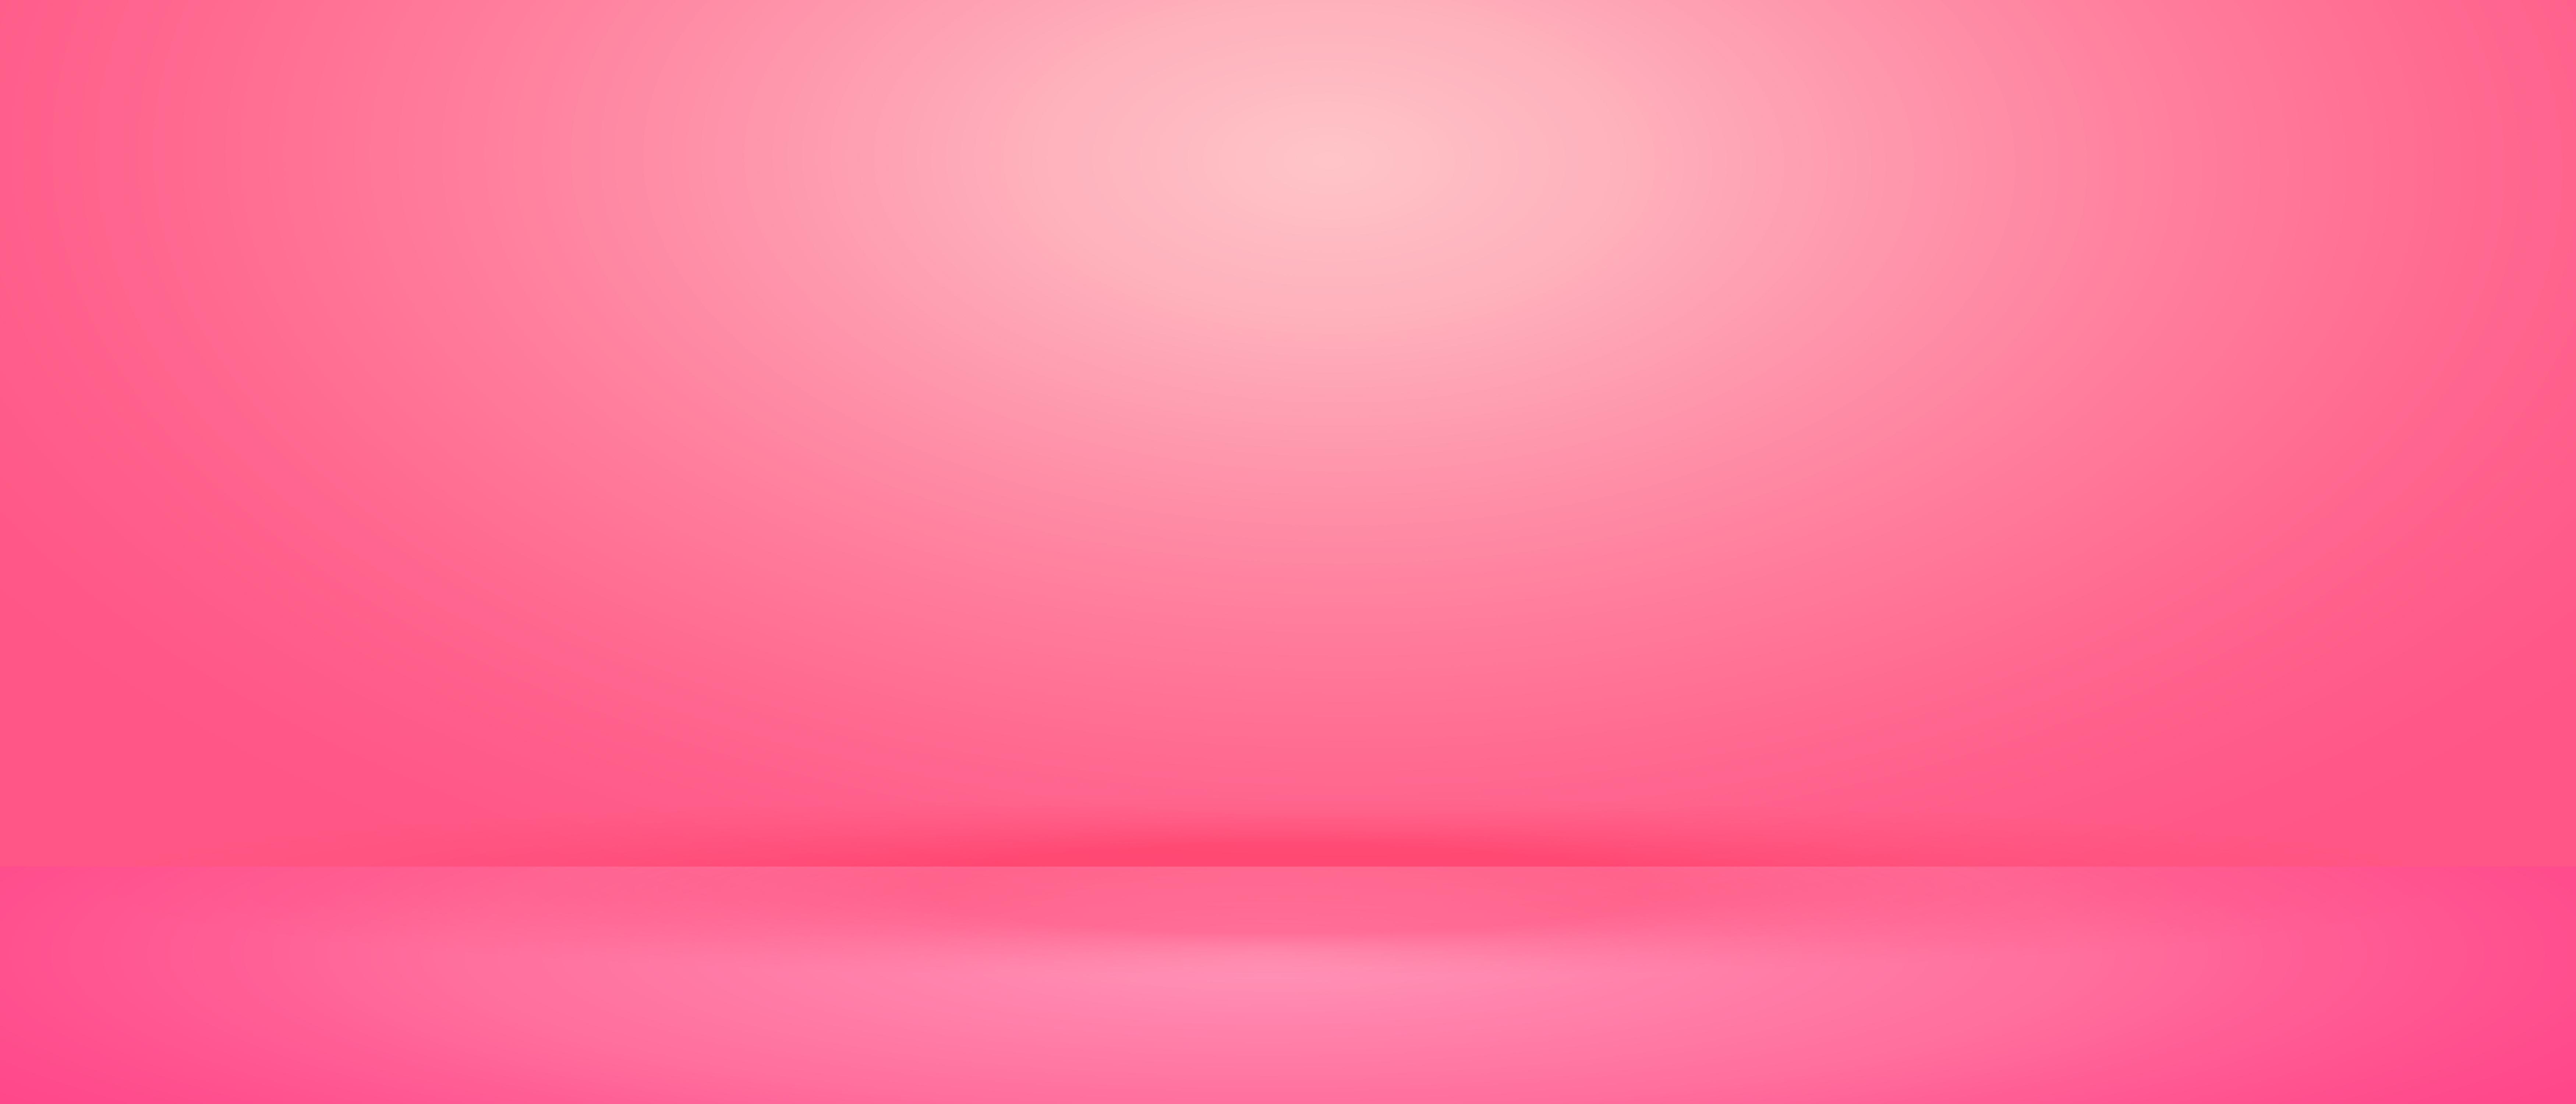 7000 x 3000 · jpeg - soft pink wall banner and studio room background 518529 Vector Art at ...